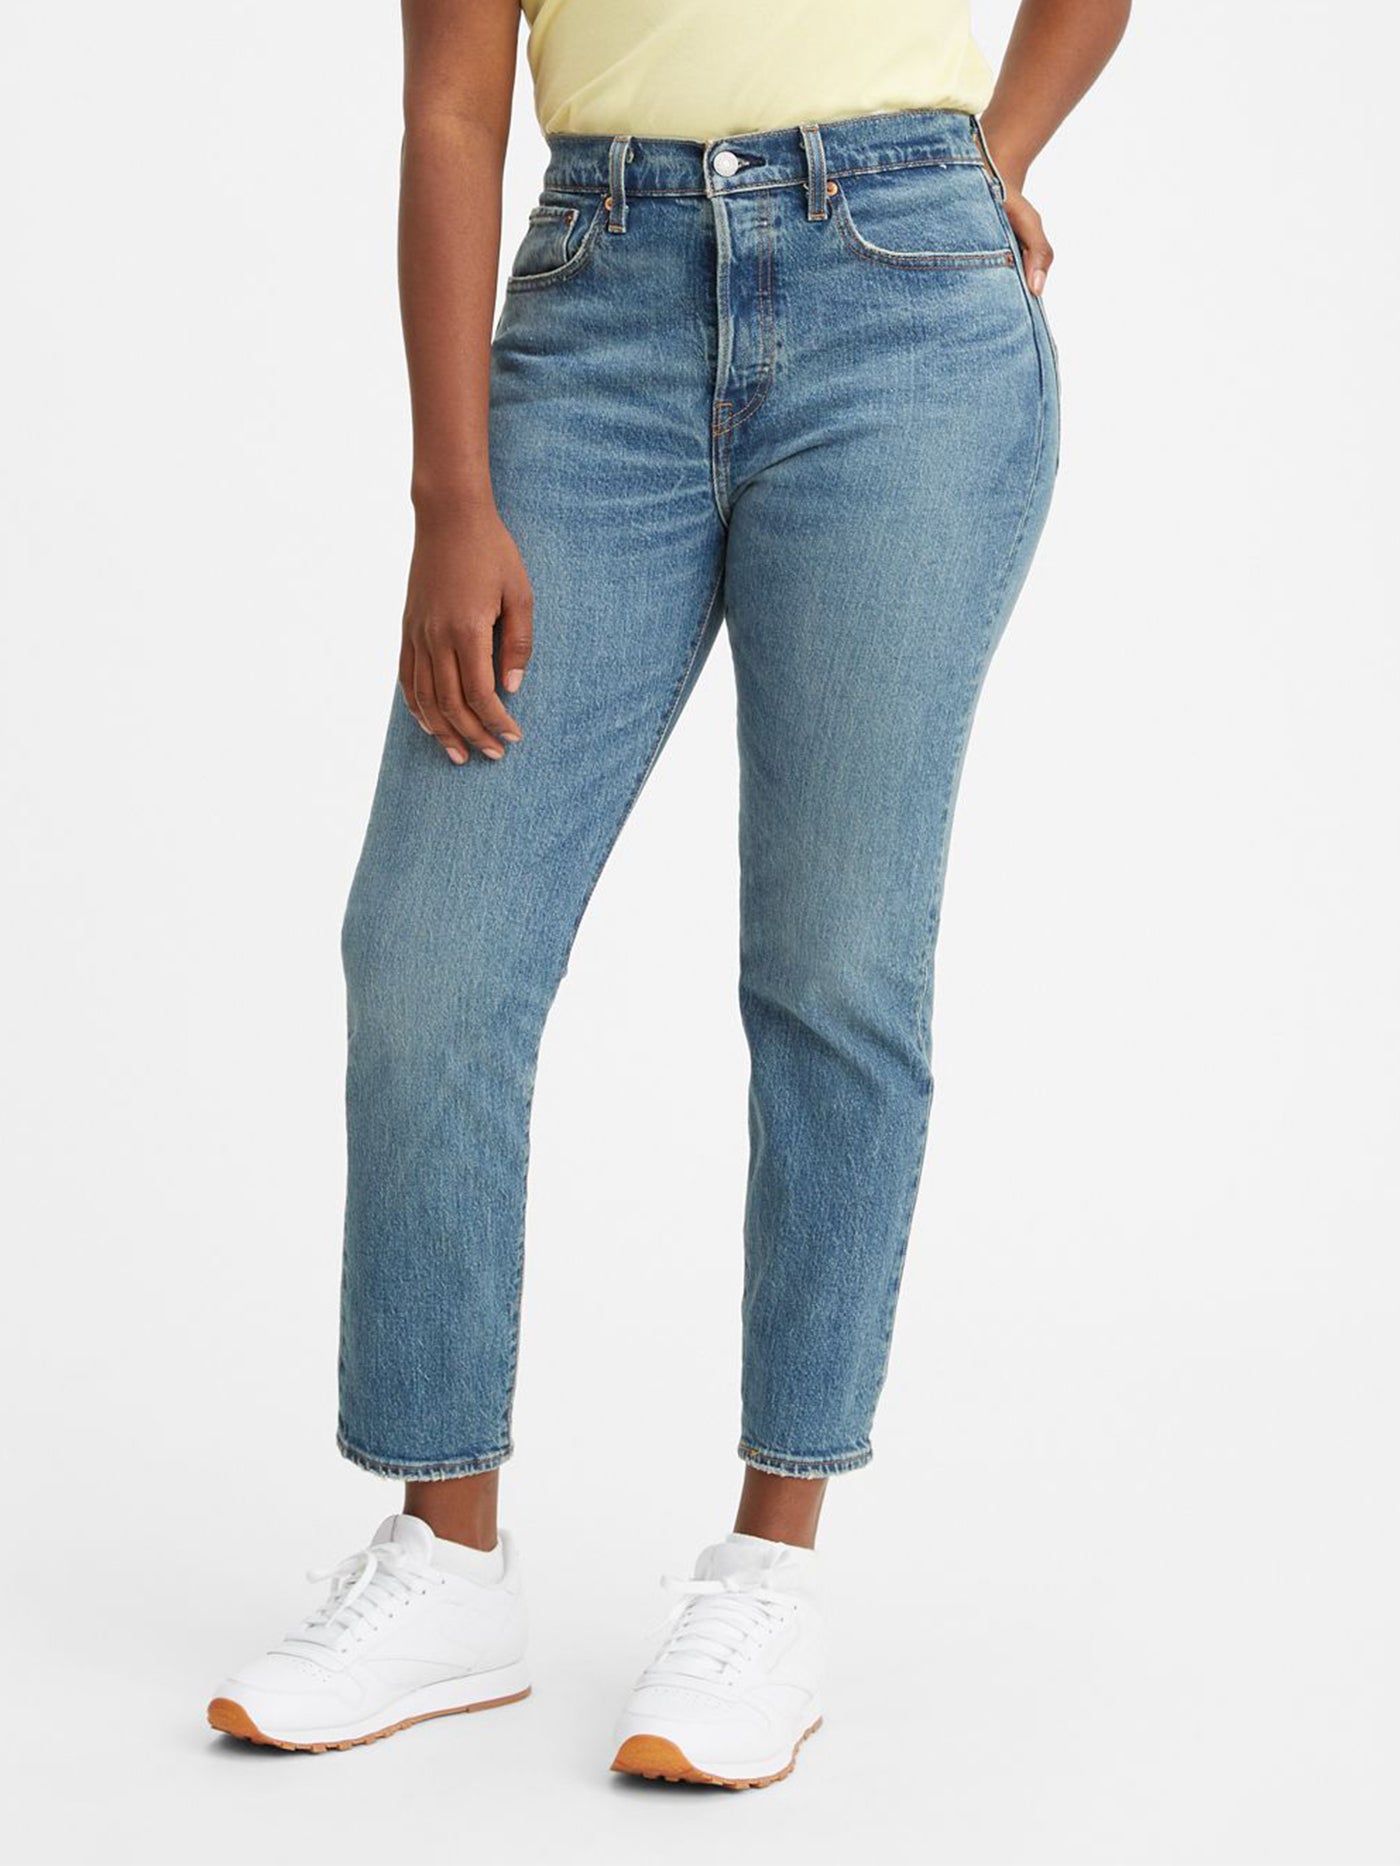 Levis Wedgie Icon High Rise Tapered Straight Fit Jeans